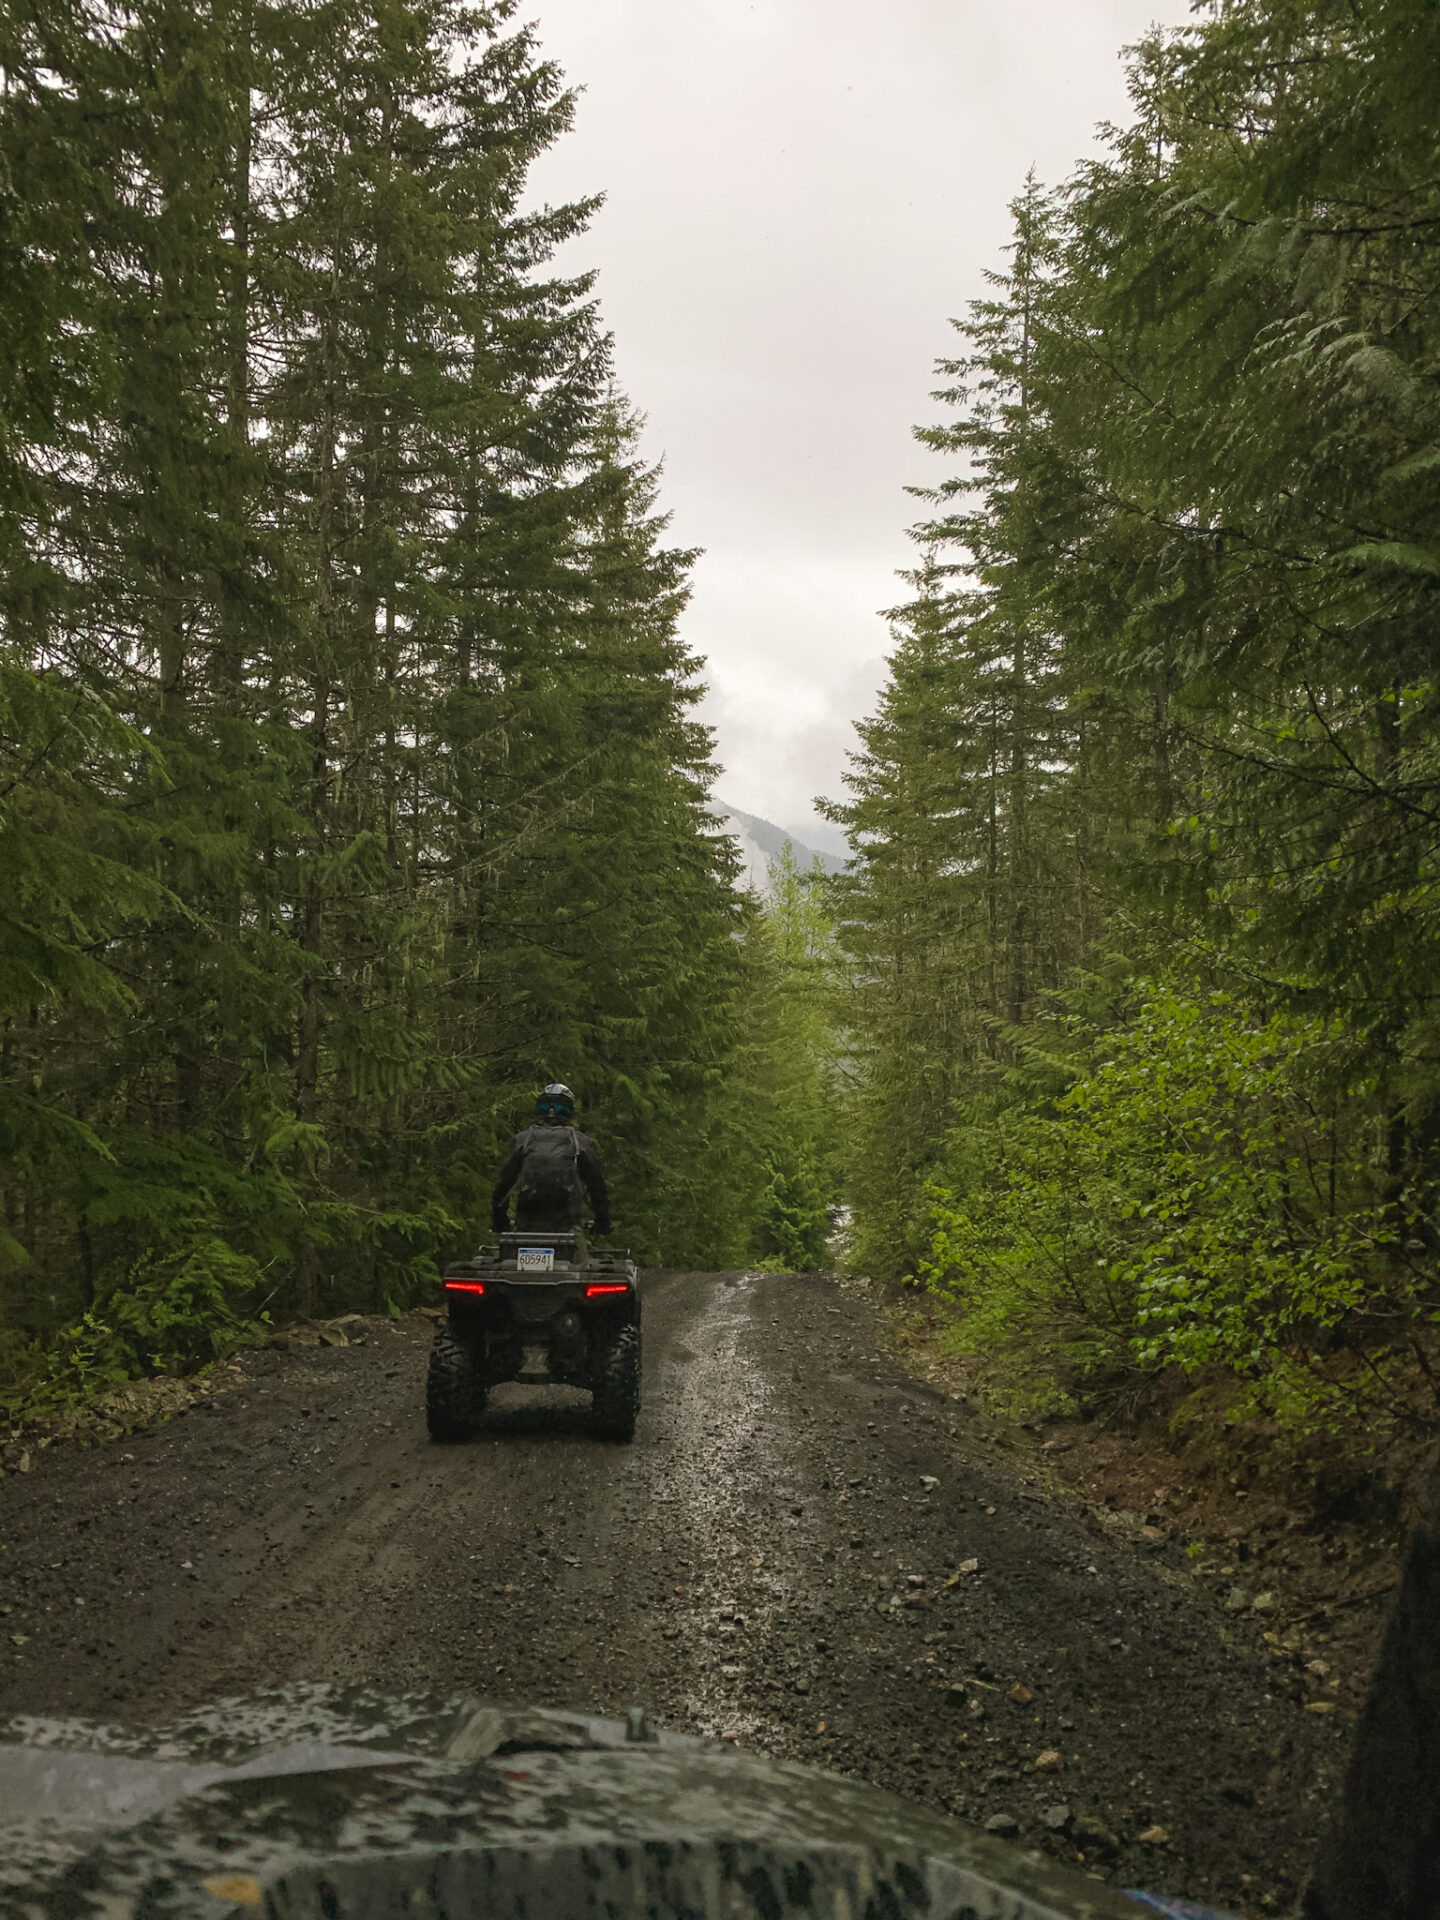 RZR tour with The Adventure Group in Whistler, British Columbia